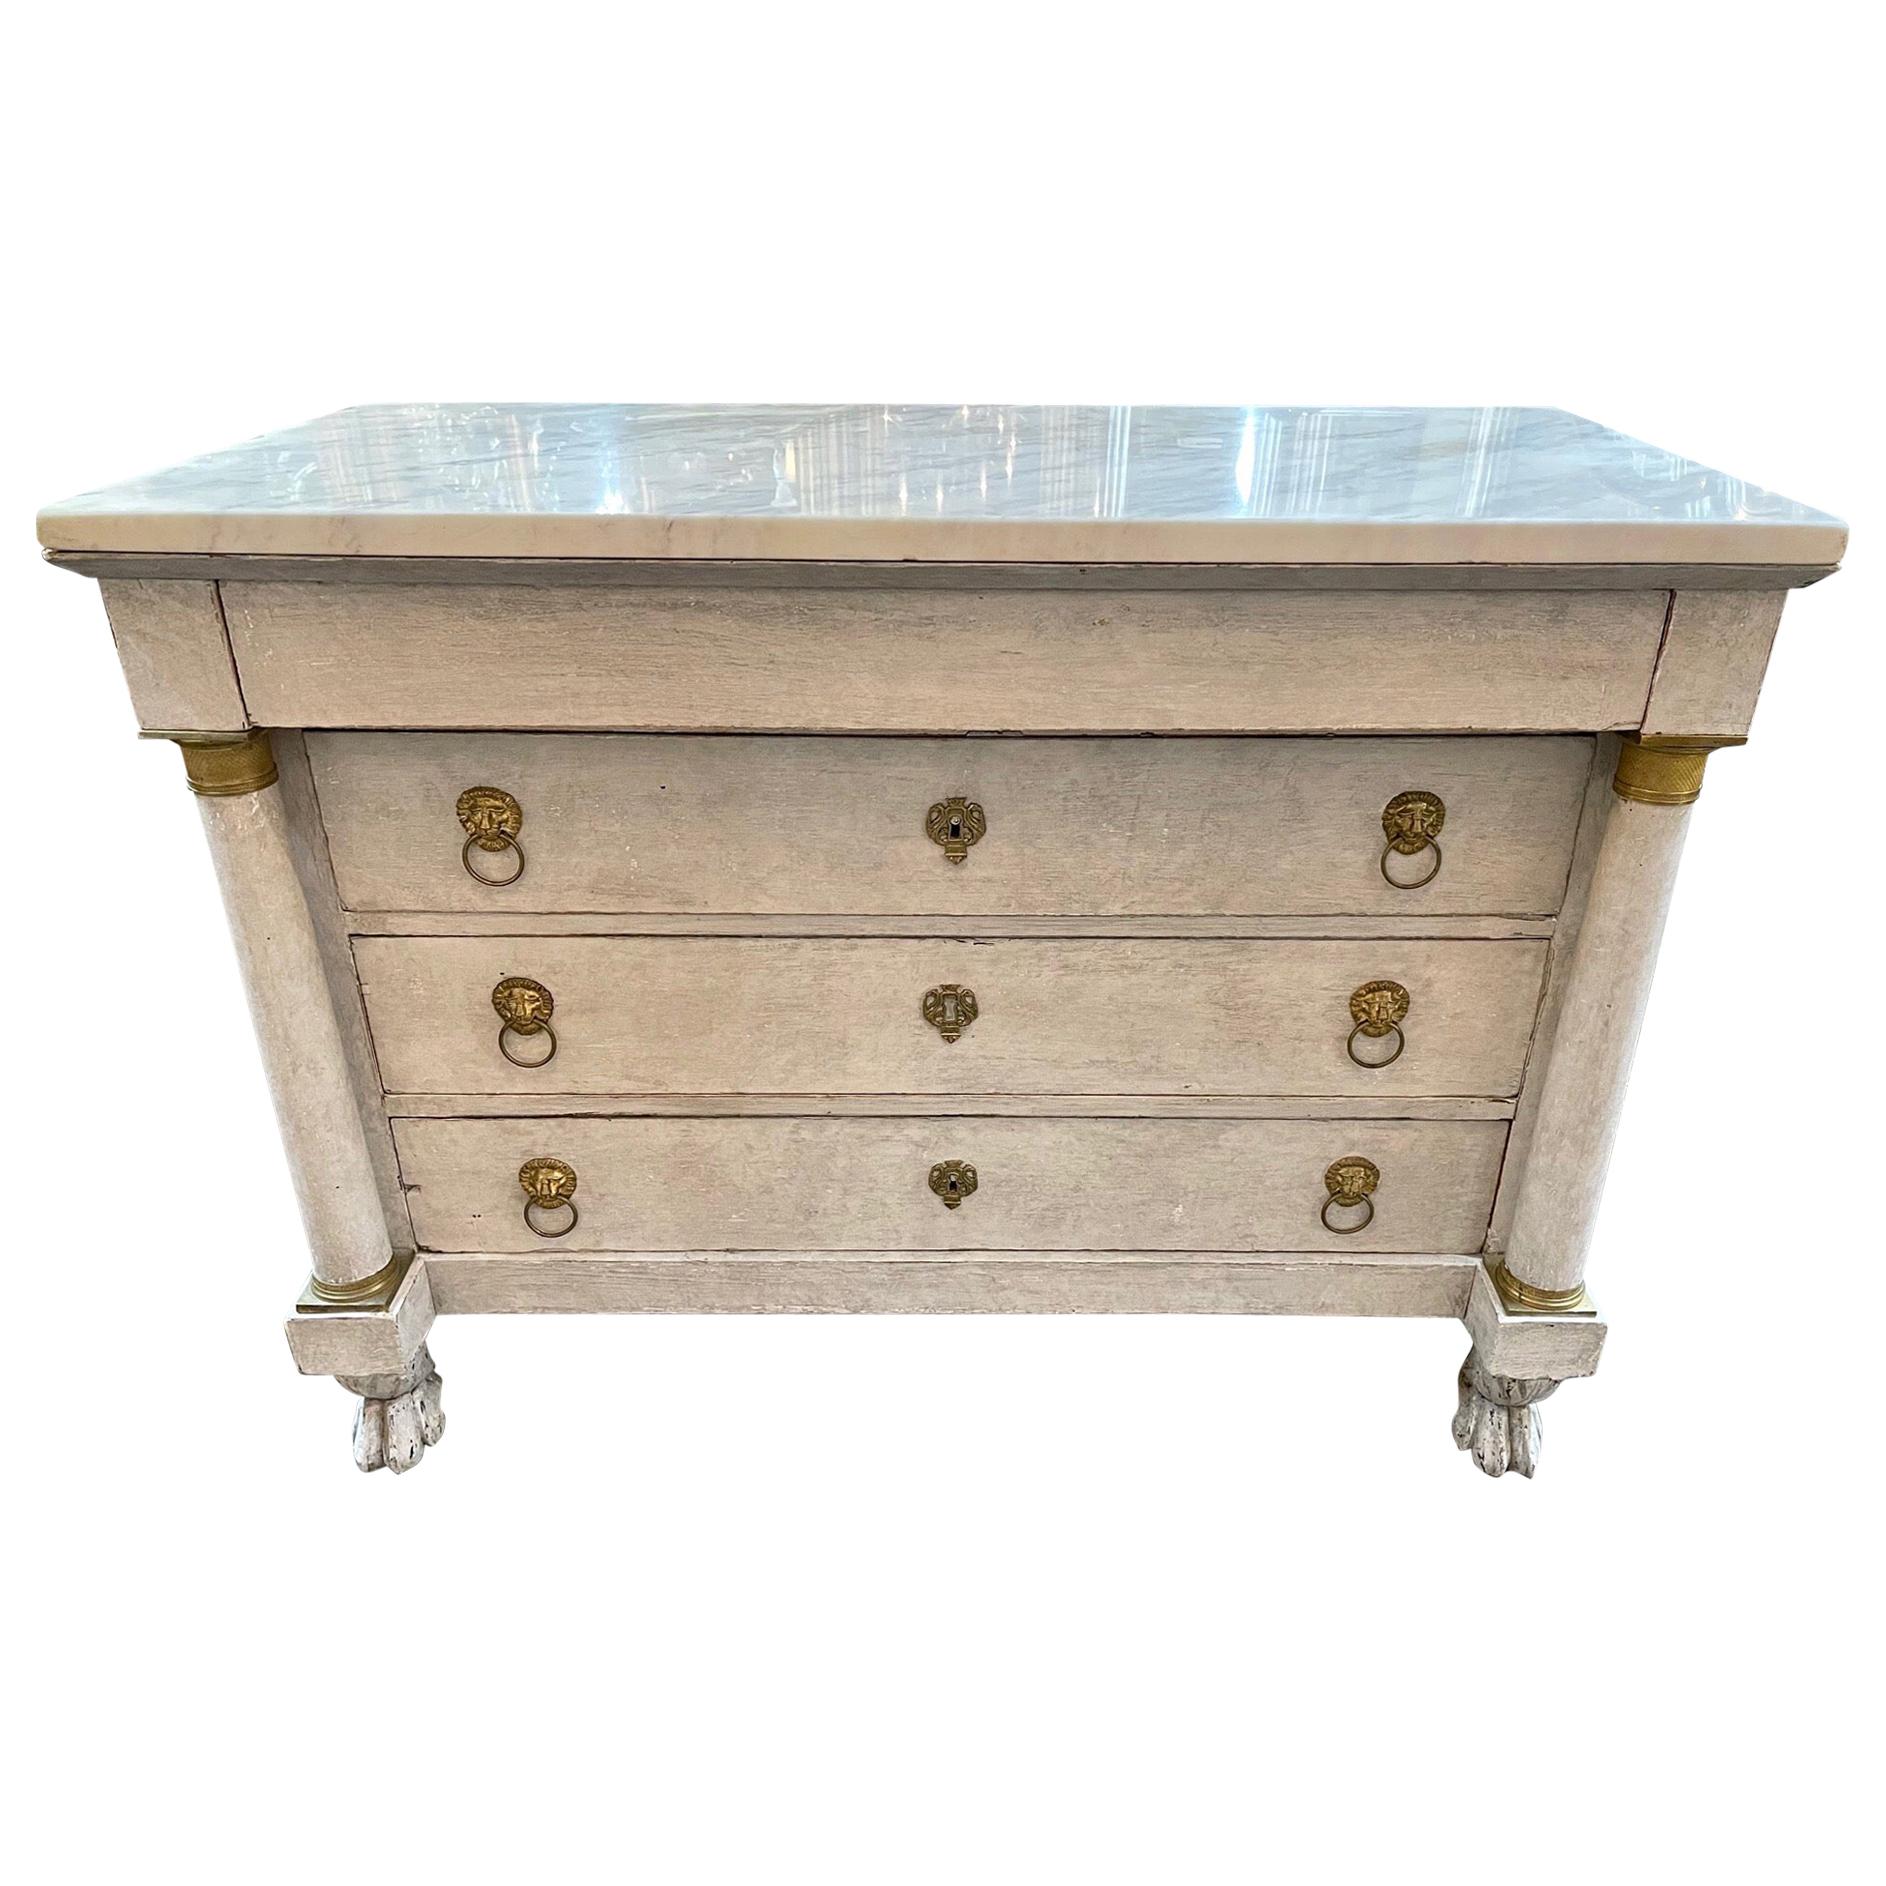 19th Century French Painted Empire Commode